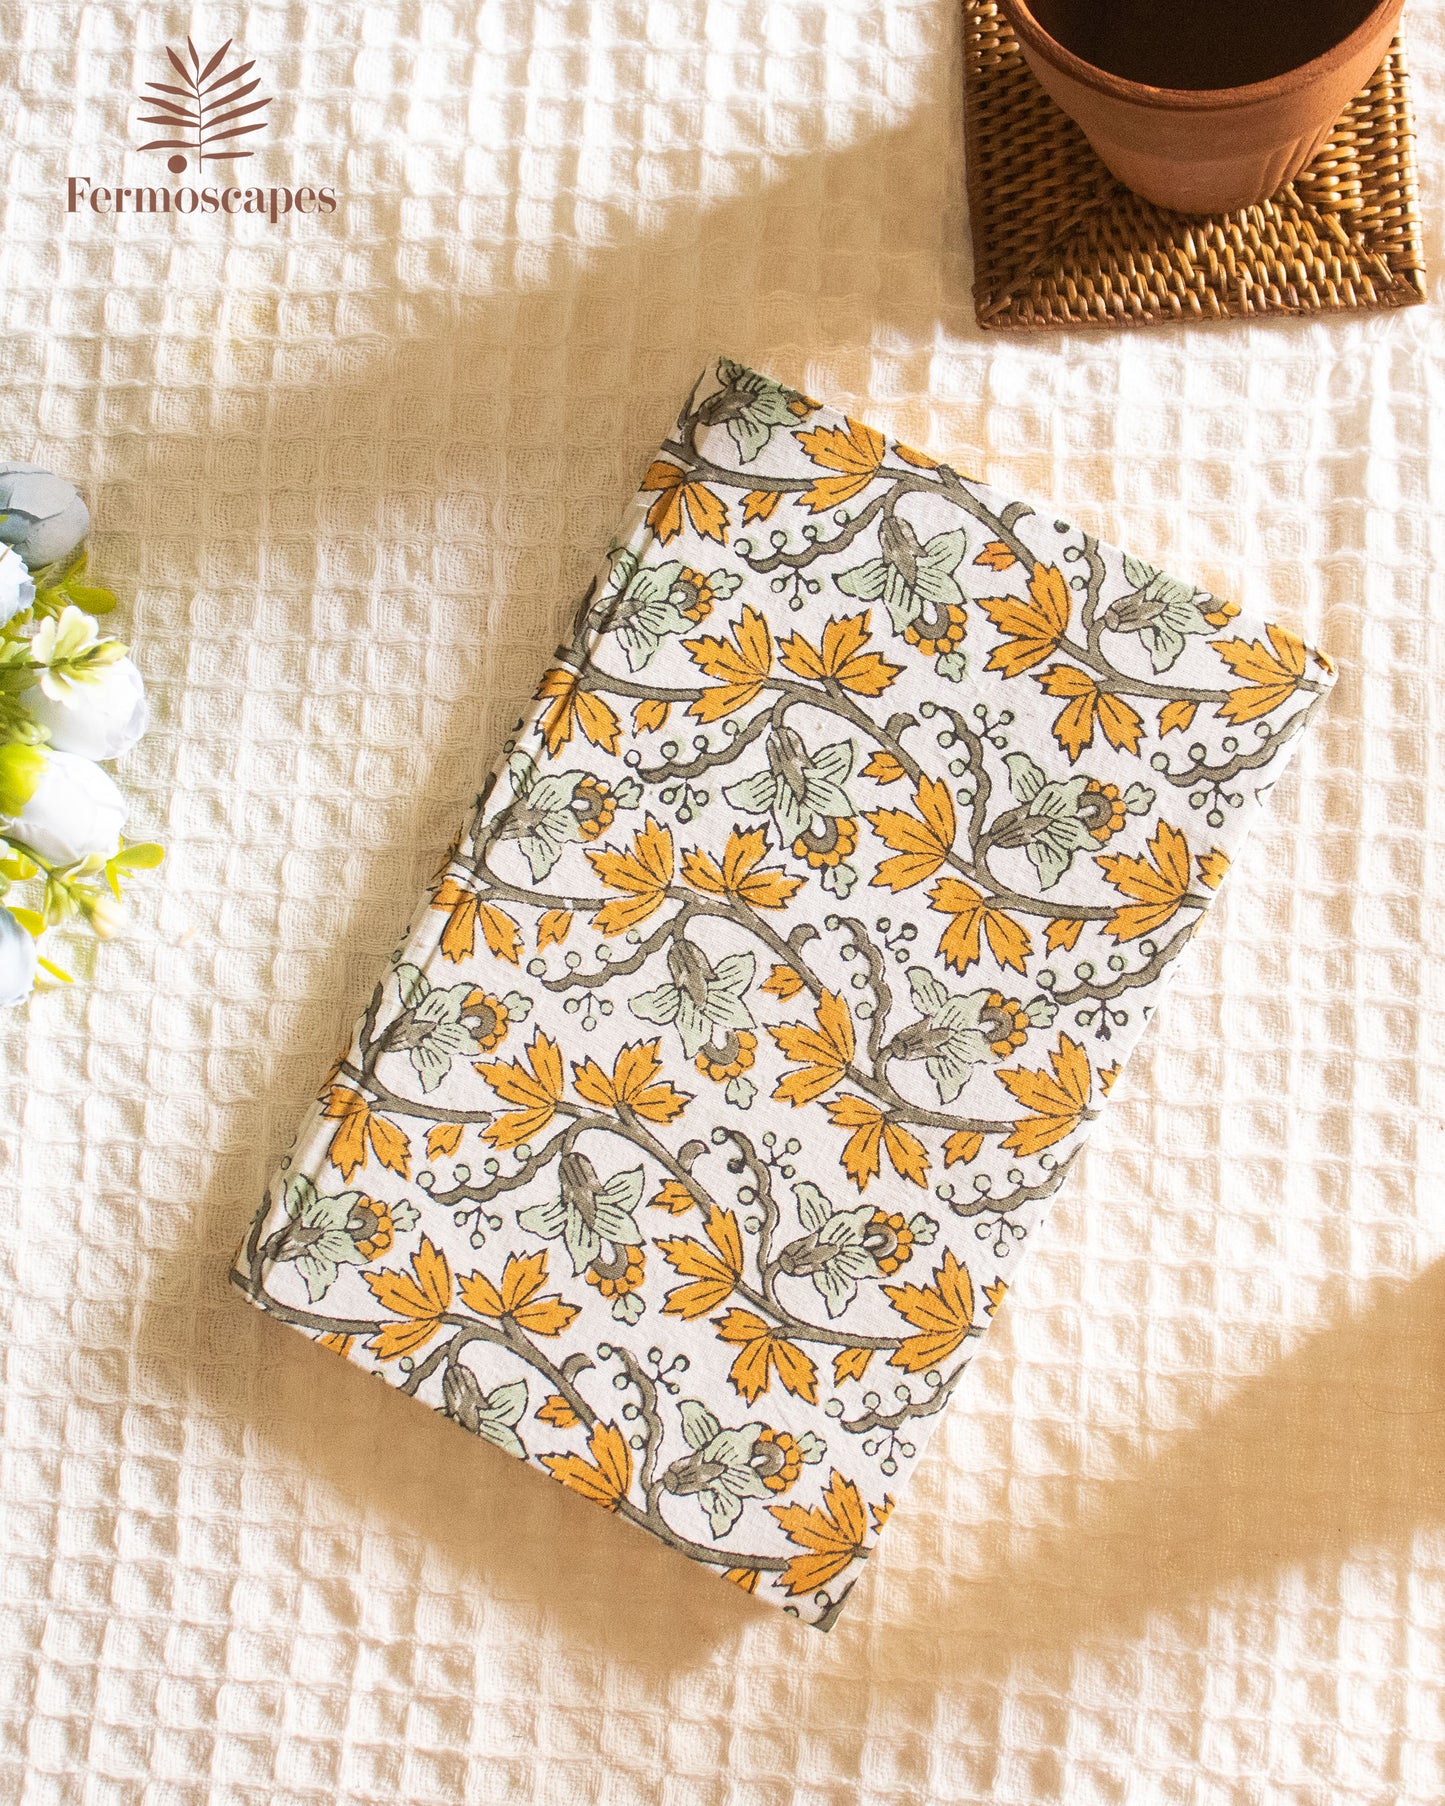 Handmade block printed diary- Yellow and white floral